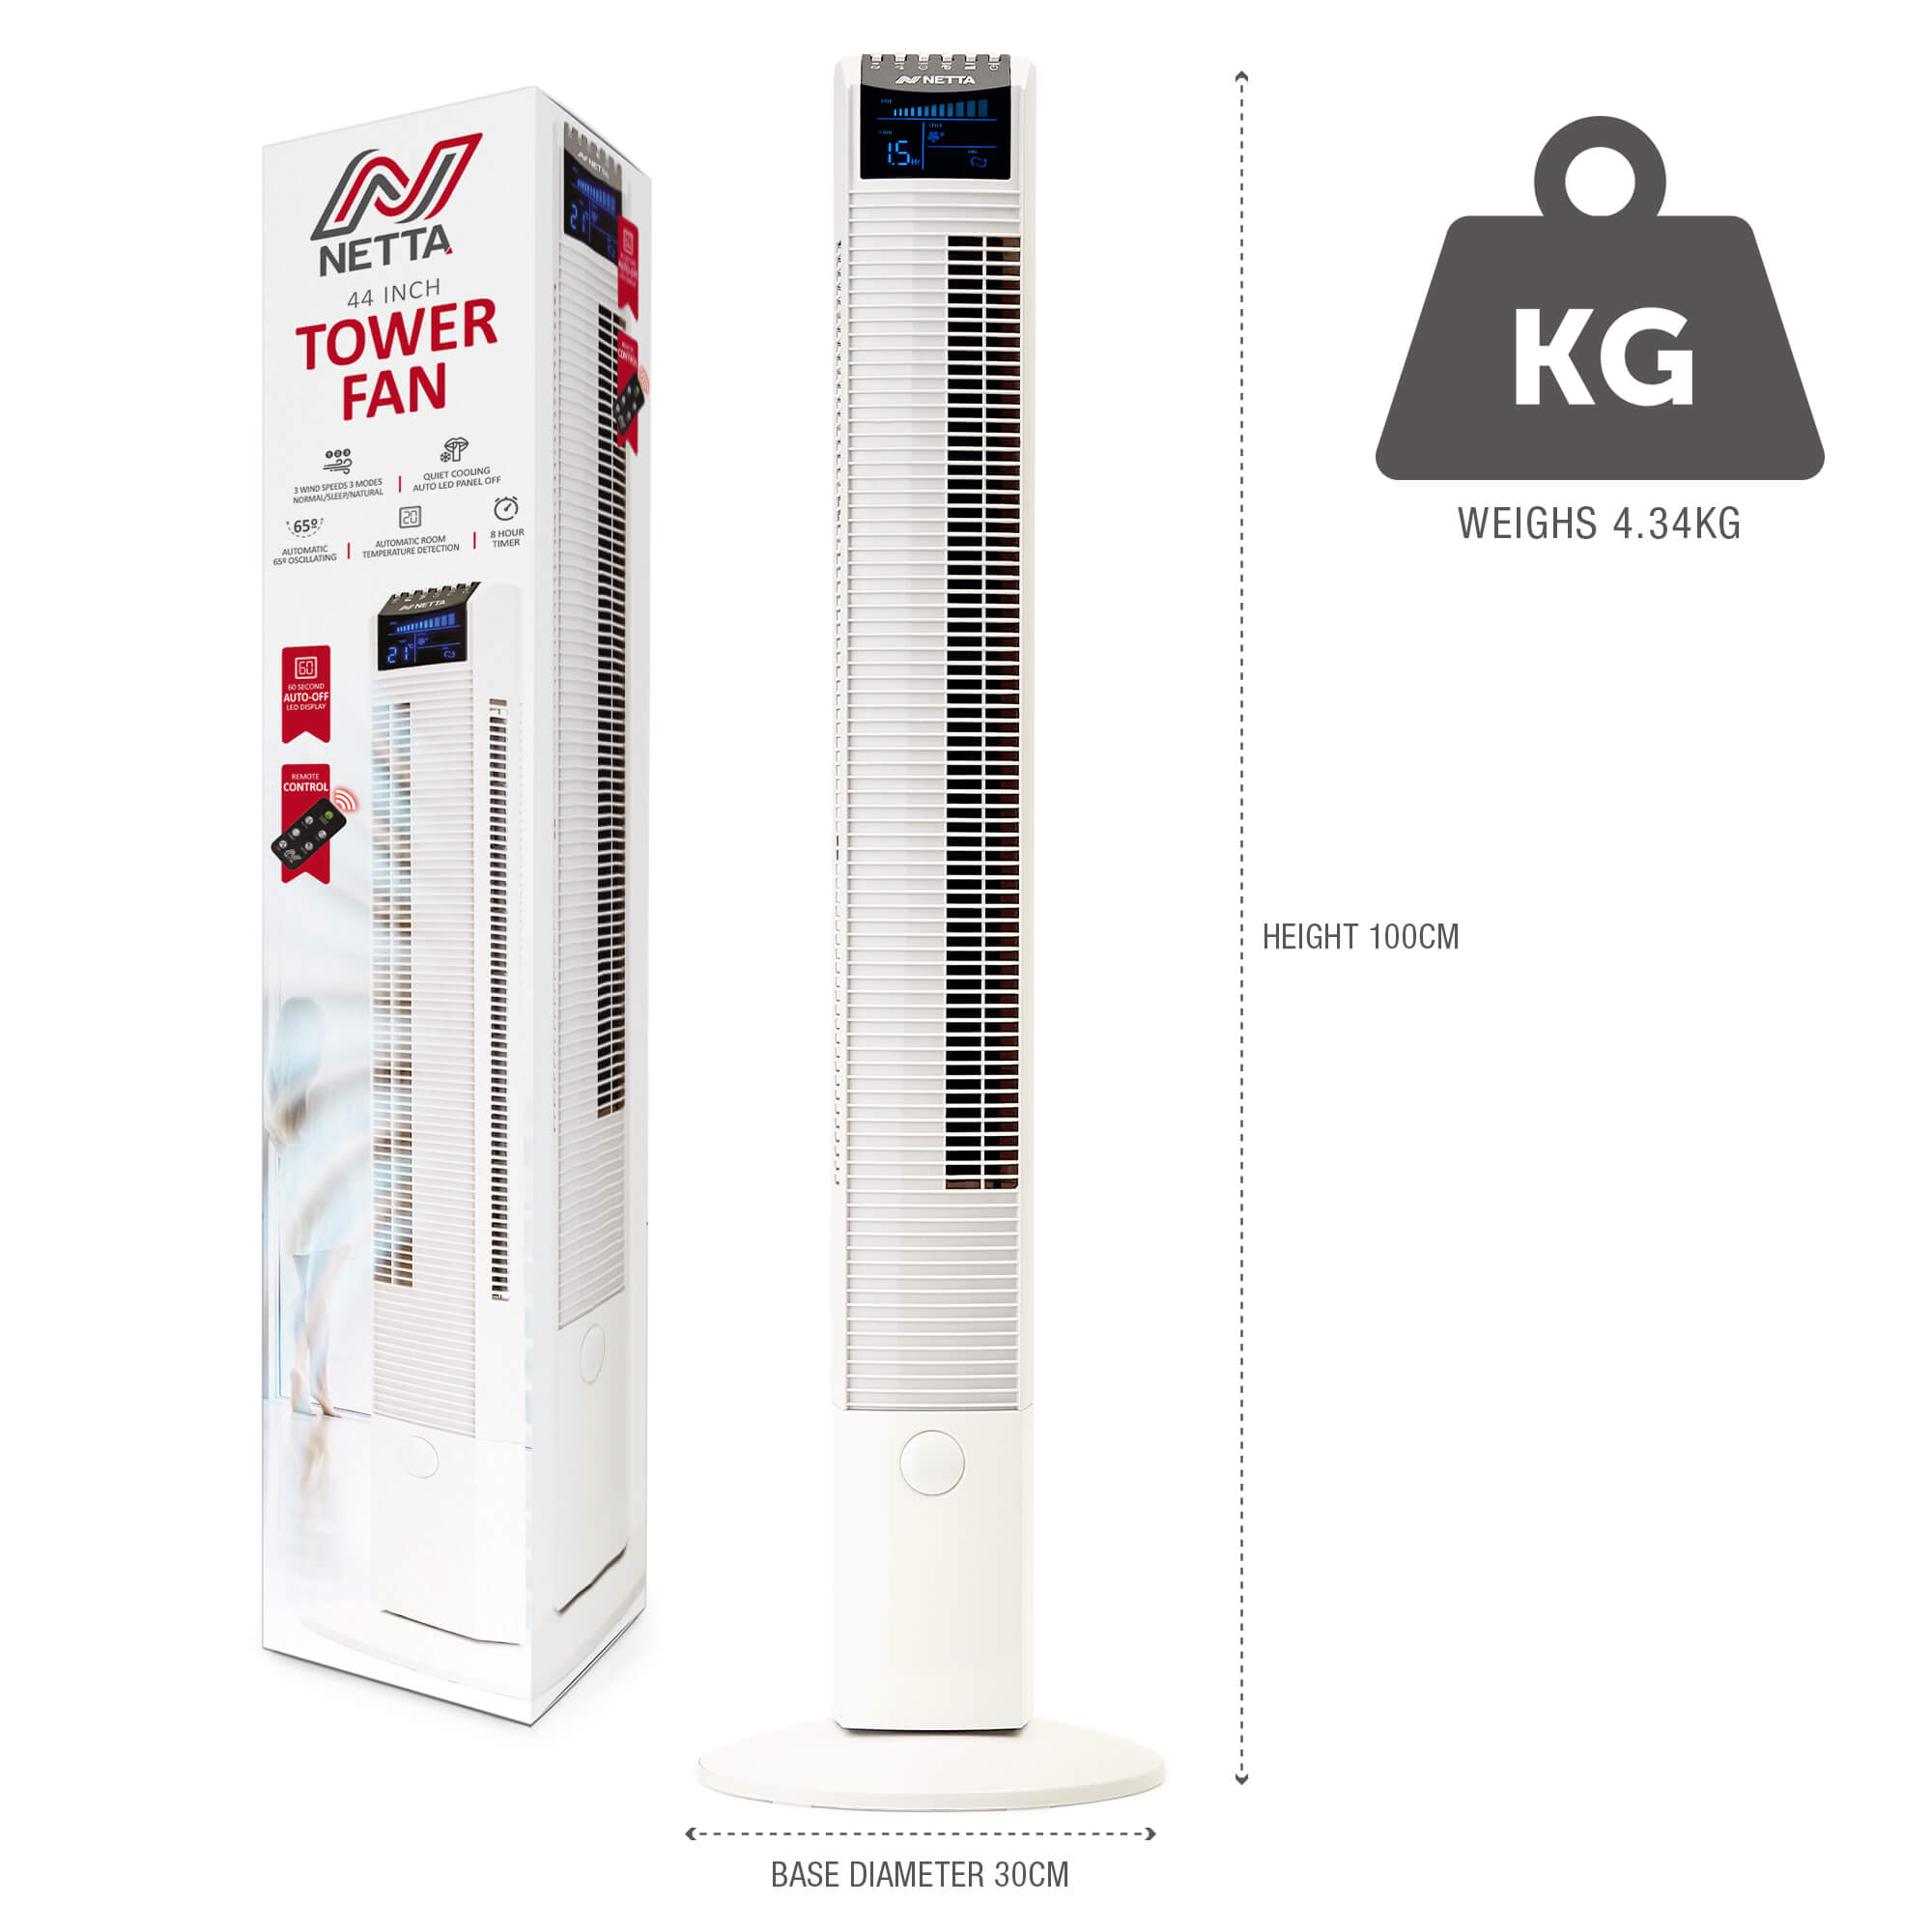 NETTA 44 Inch Tower Fan with 8-hour Timer - White